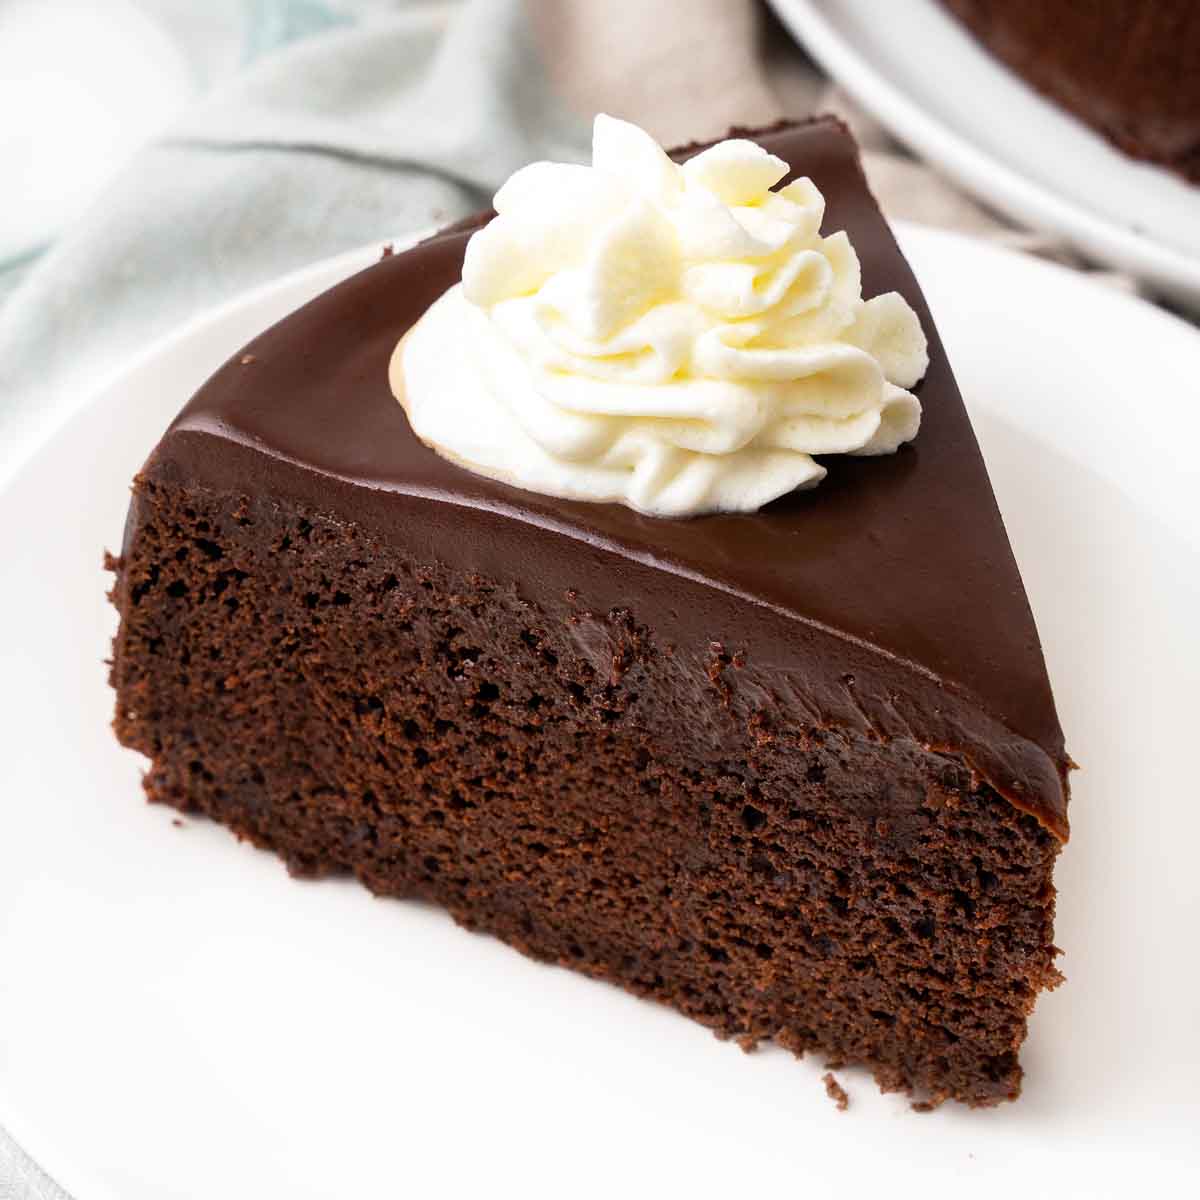 Slice of chocolate mud cake with whipped cream on a white plate.